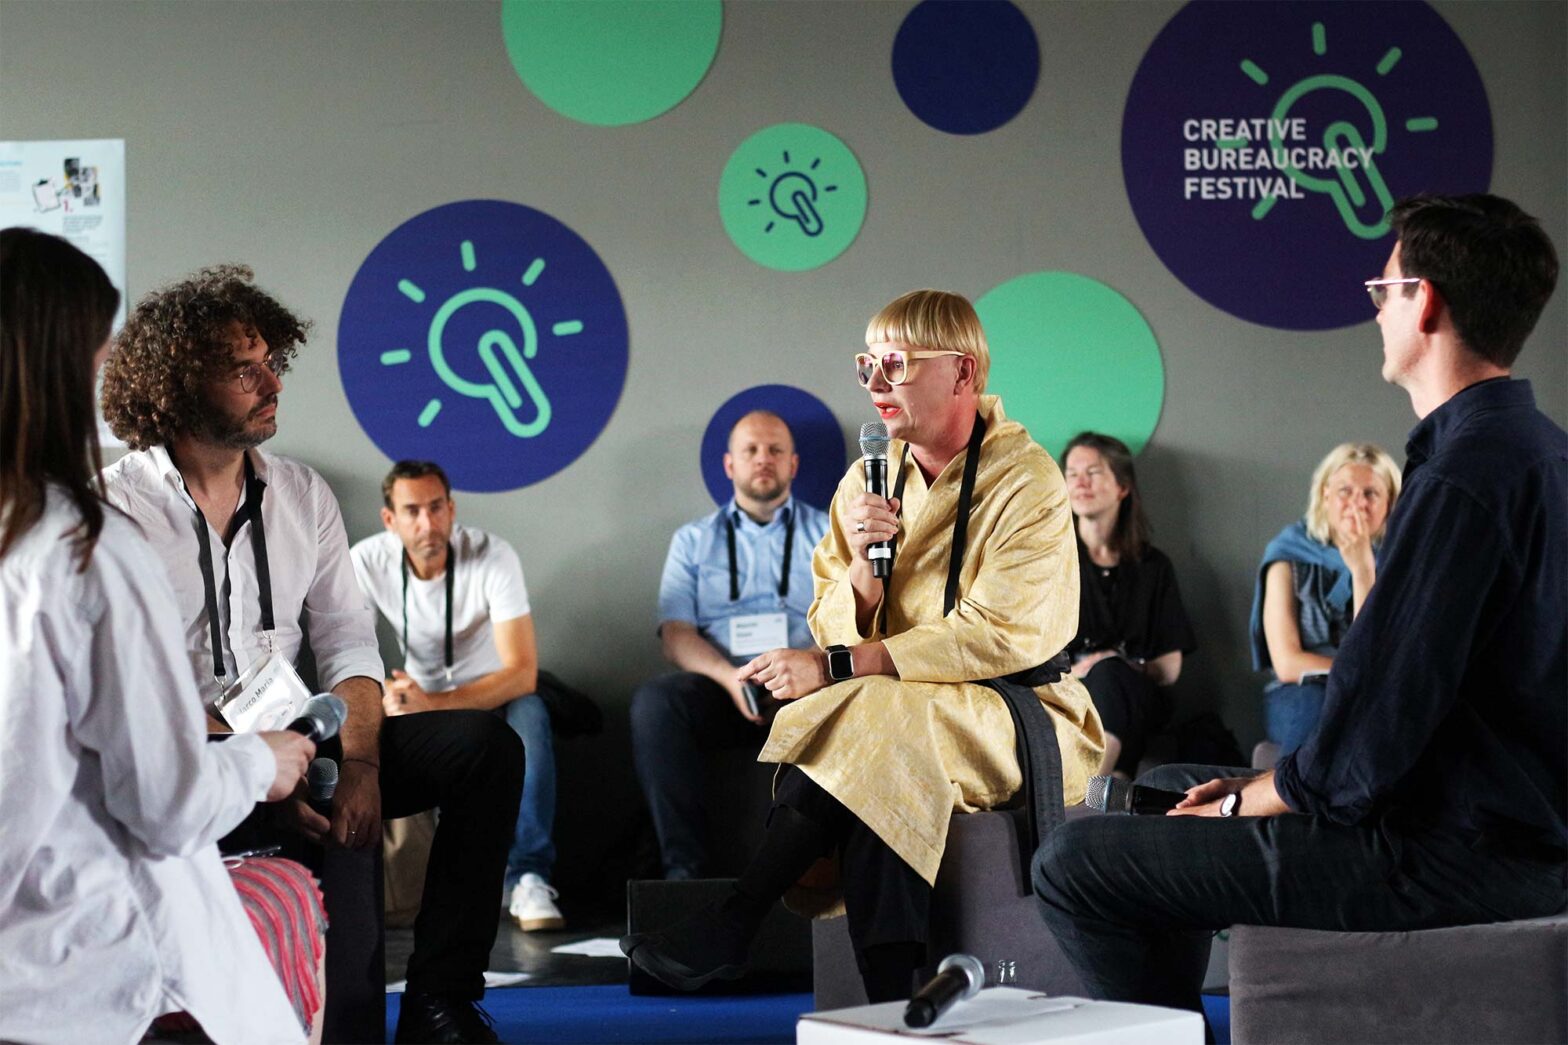 A group of 4 people with microphones and lanyards are sitting on stools, discussing – 4 more people who look at them sit behind them, leading at the wall with graphical applications of logos of ‘Creative Bureaucracy Festival’ – all people have lighter skin tones